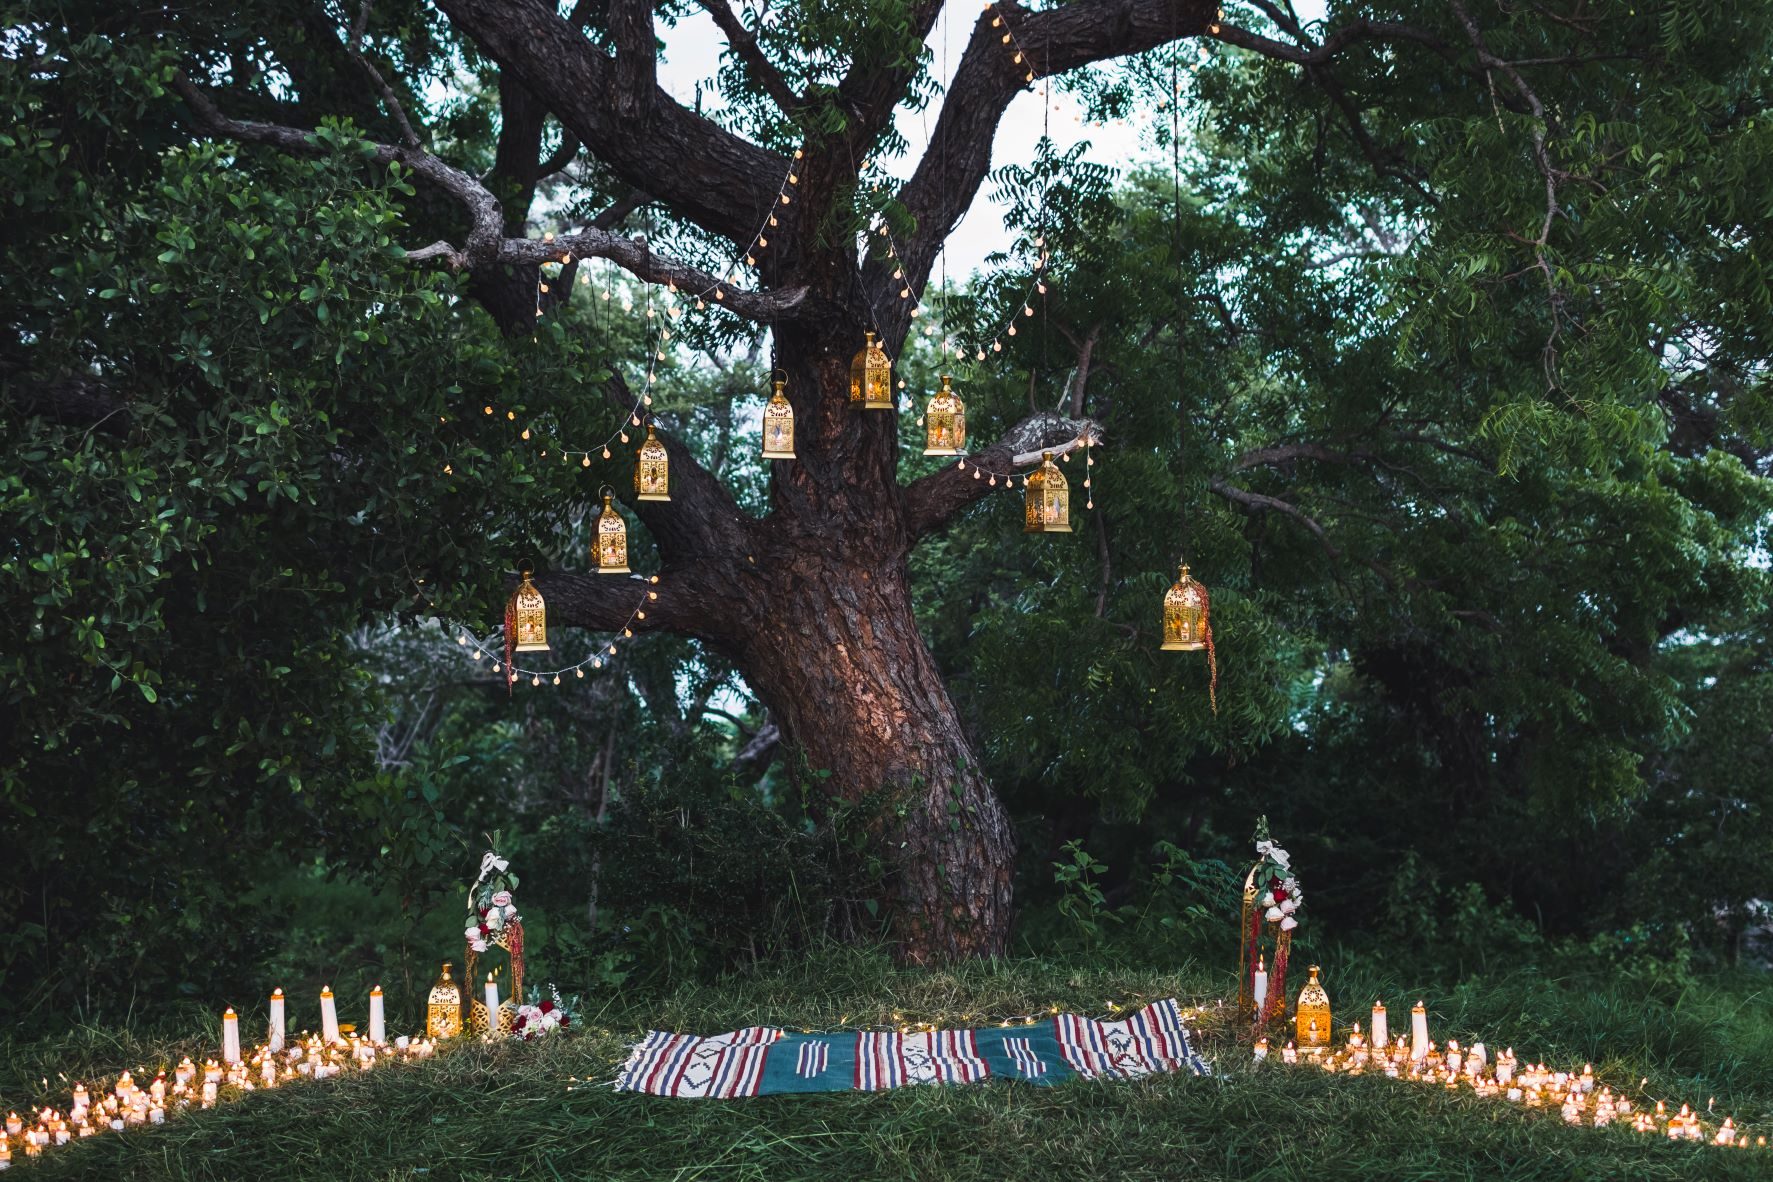 night-wedding-ceremony-with-lot-candles-vintage-lamps-big-tree,resize